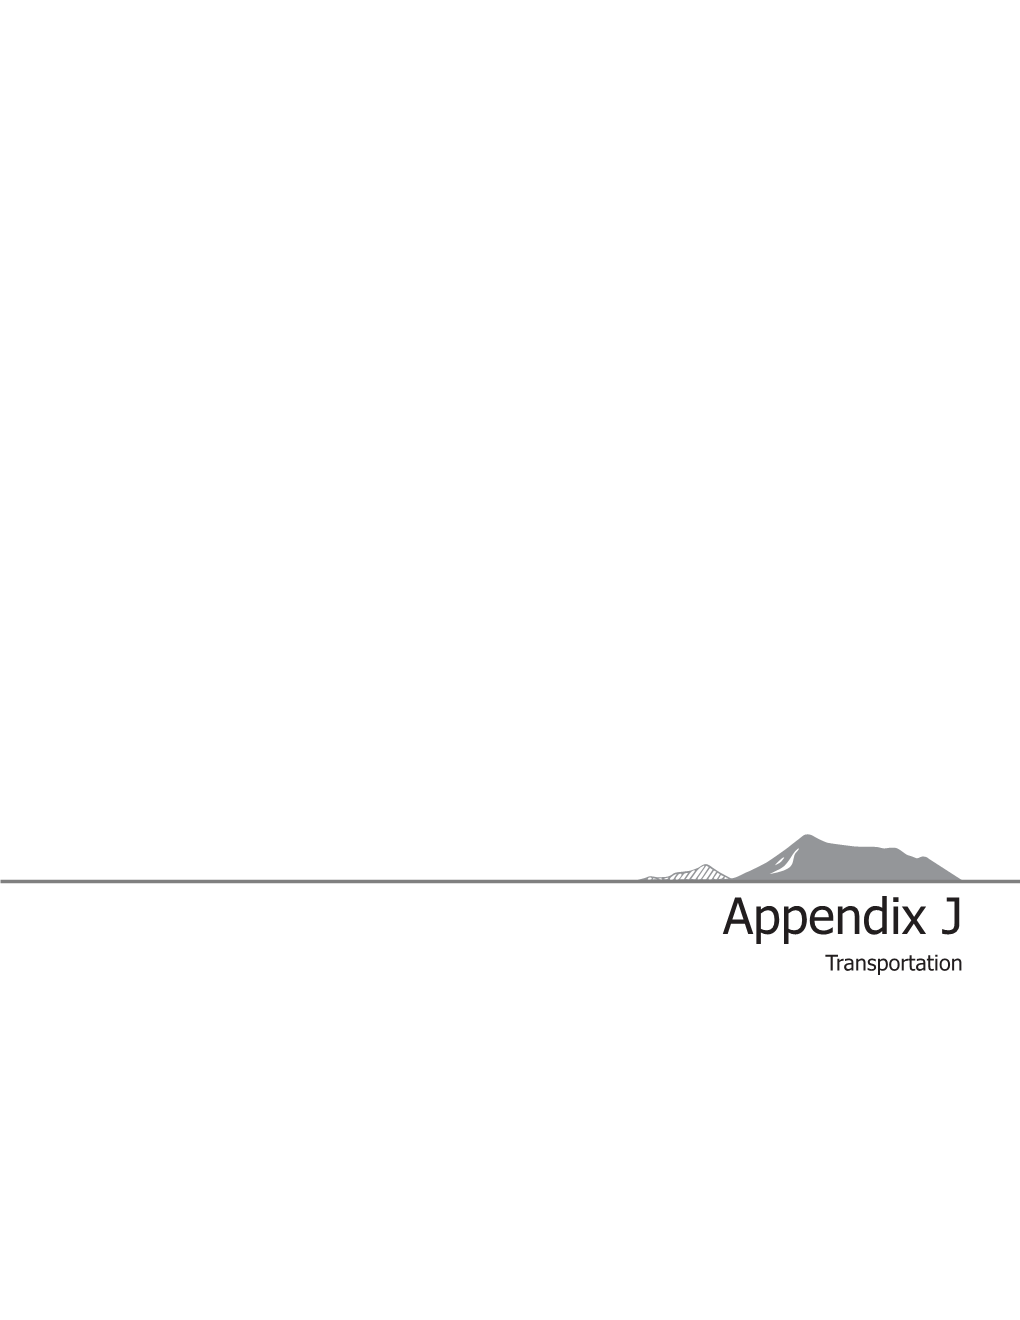 Appendix J of Final Environmental Impact Statement for a Geologic